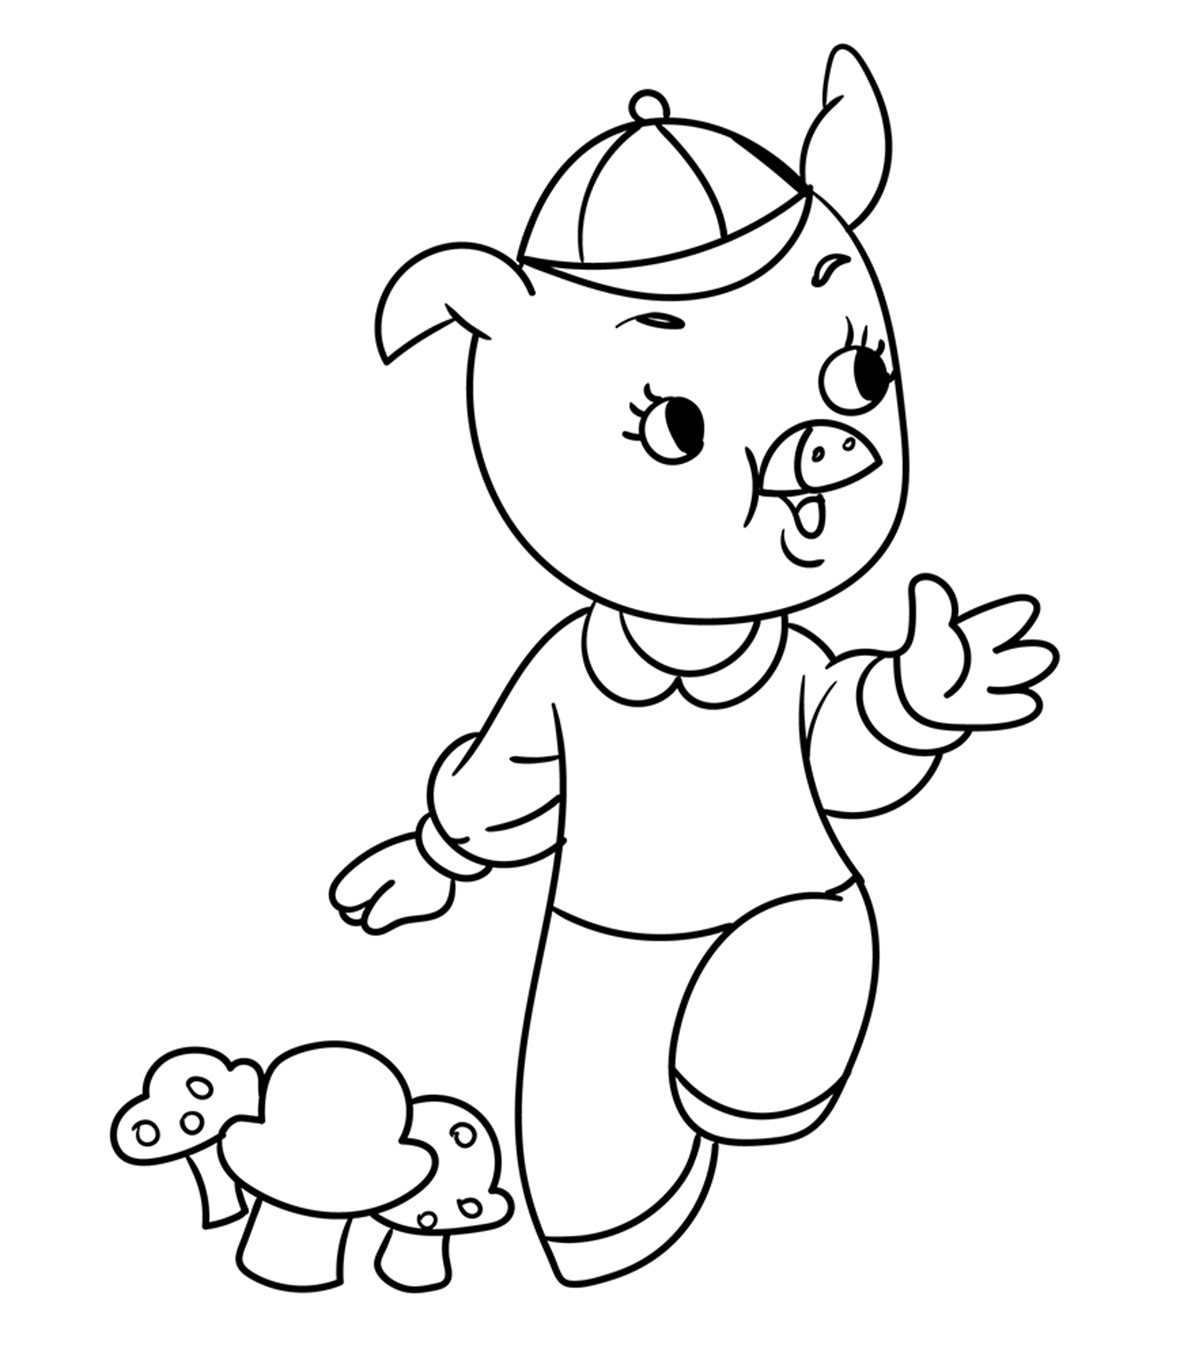 Cute Pigs Coloring Pages - Coloring Home